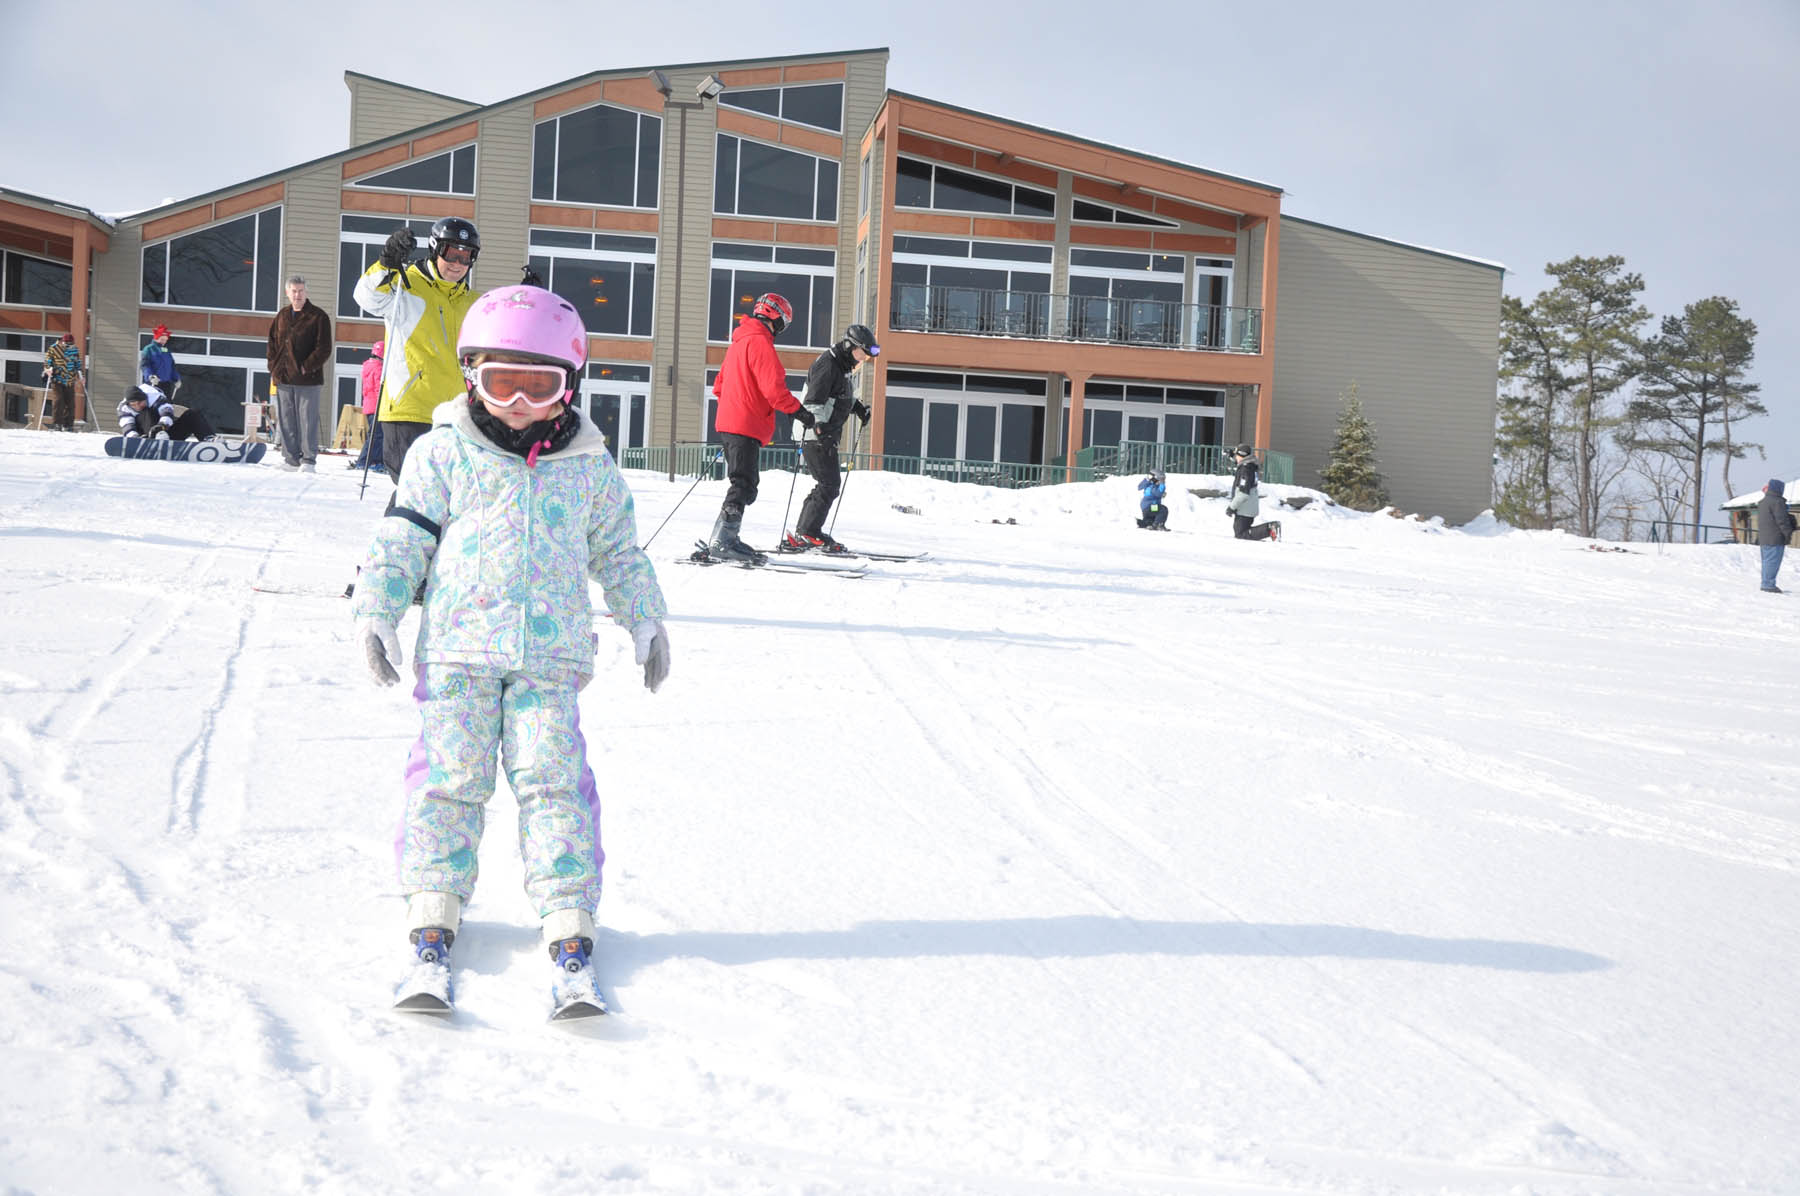 Young girl on a beginner ski hill.